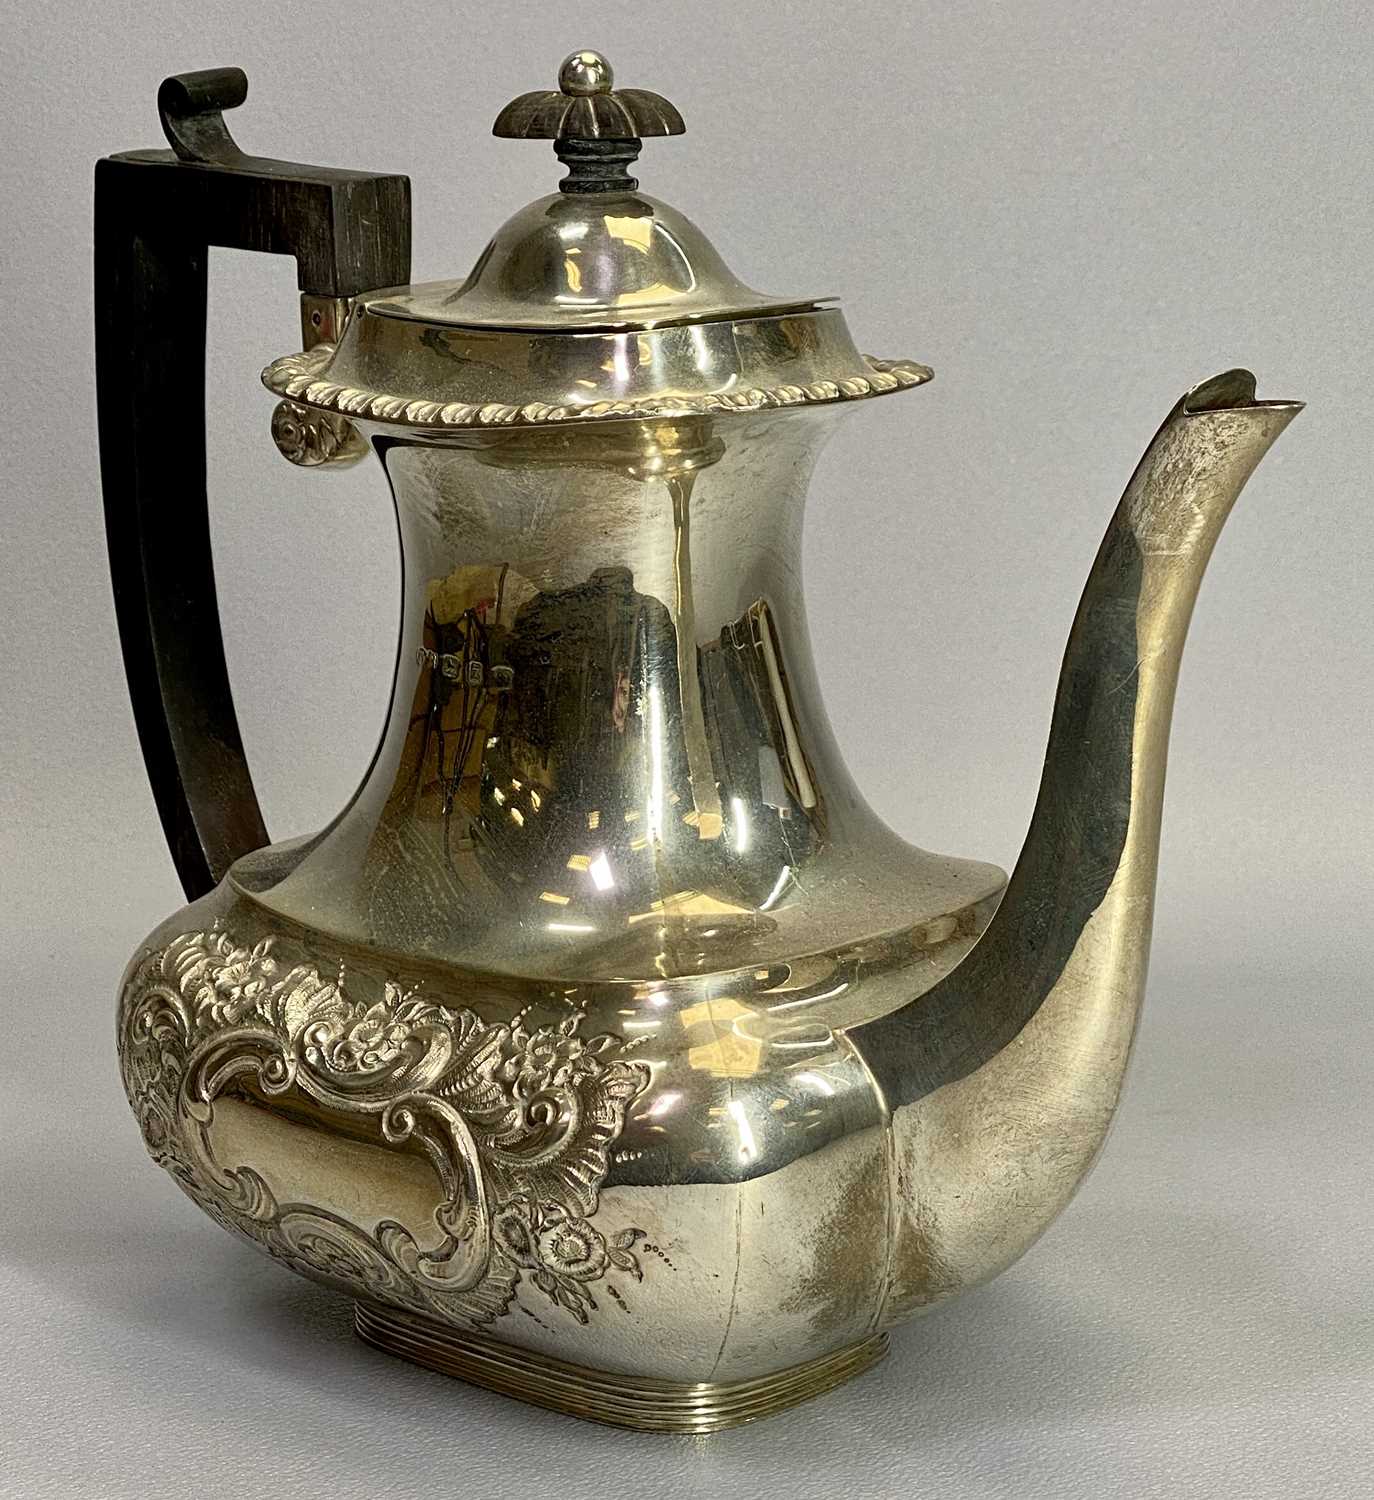 BIRMINGHAM VICTORIAN SILVER TEAPOT 1899 - Maker Synyer & Beddoes, waisted form with floral - Image 3 of 3